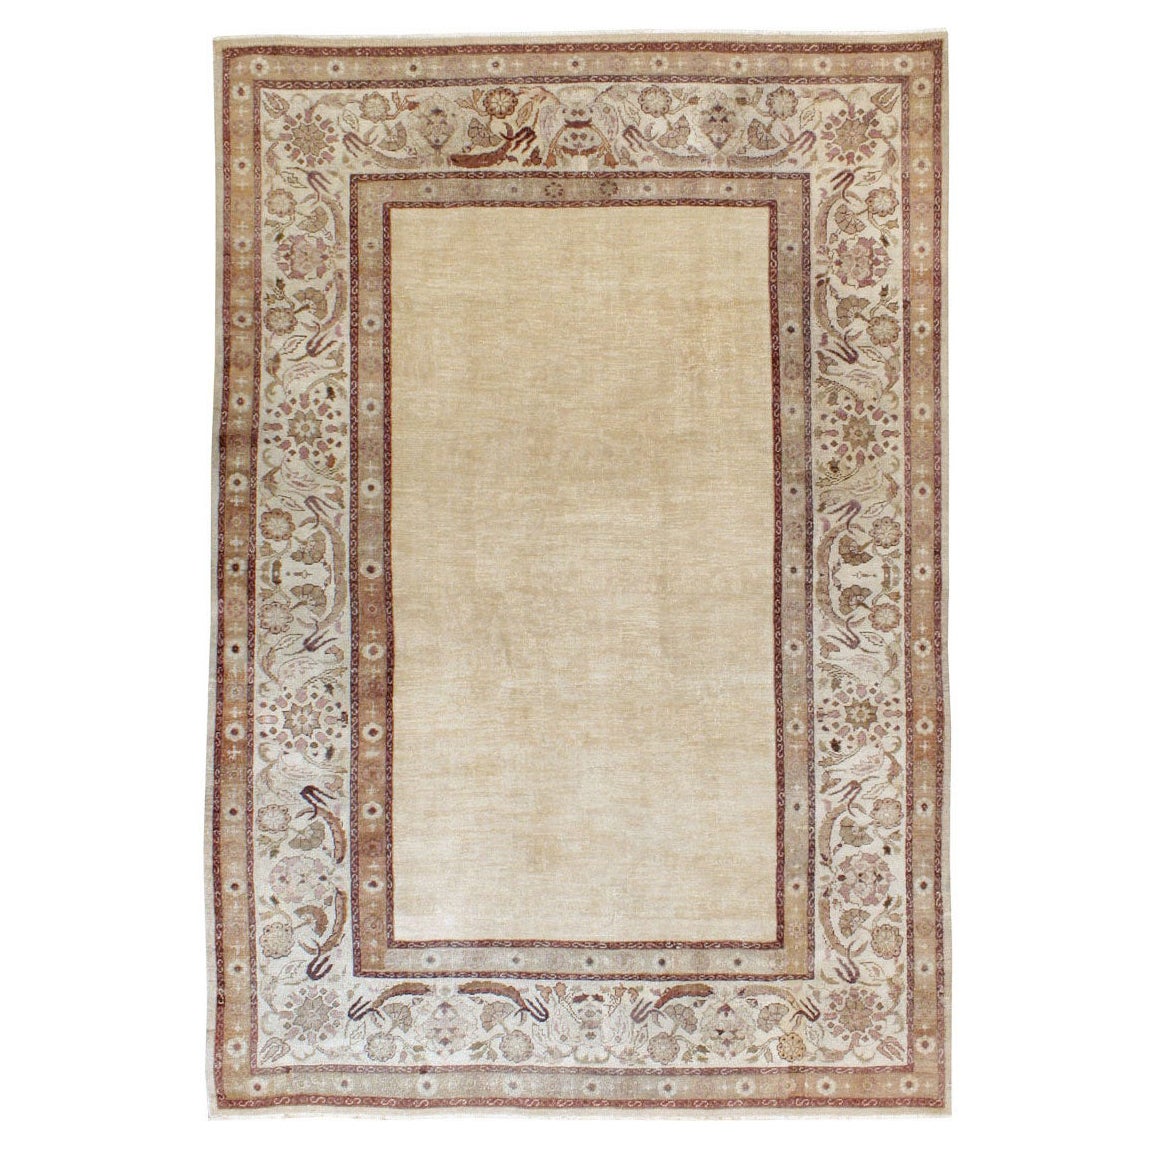 Early 20th Century Handmade Indian Agra Small Room Size Carpet